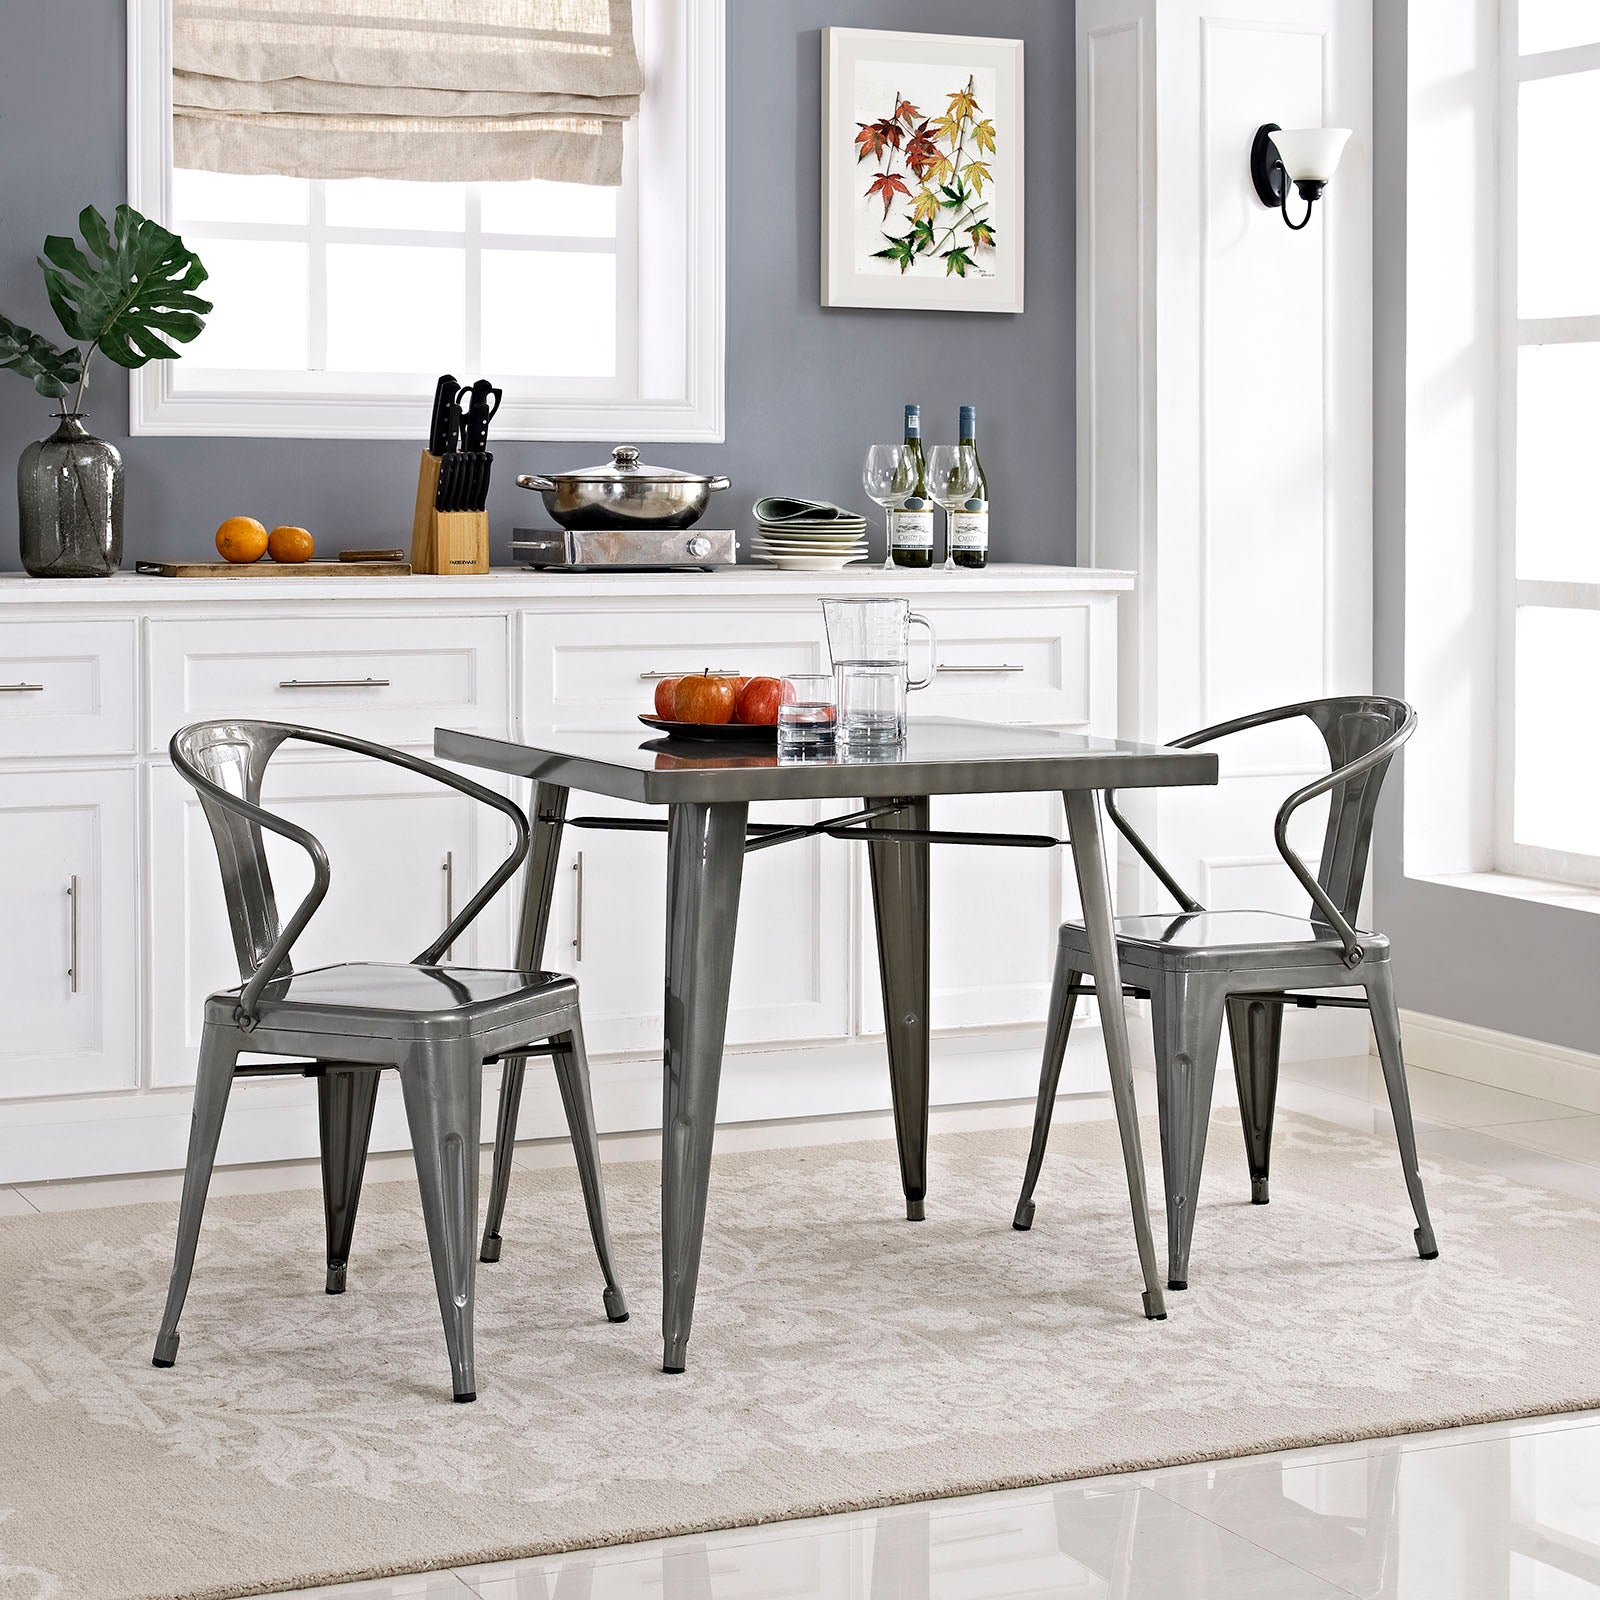 Alacrity Square Metal Dining Table - East Shore Modern Home Furnishings